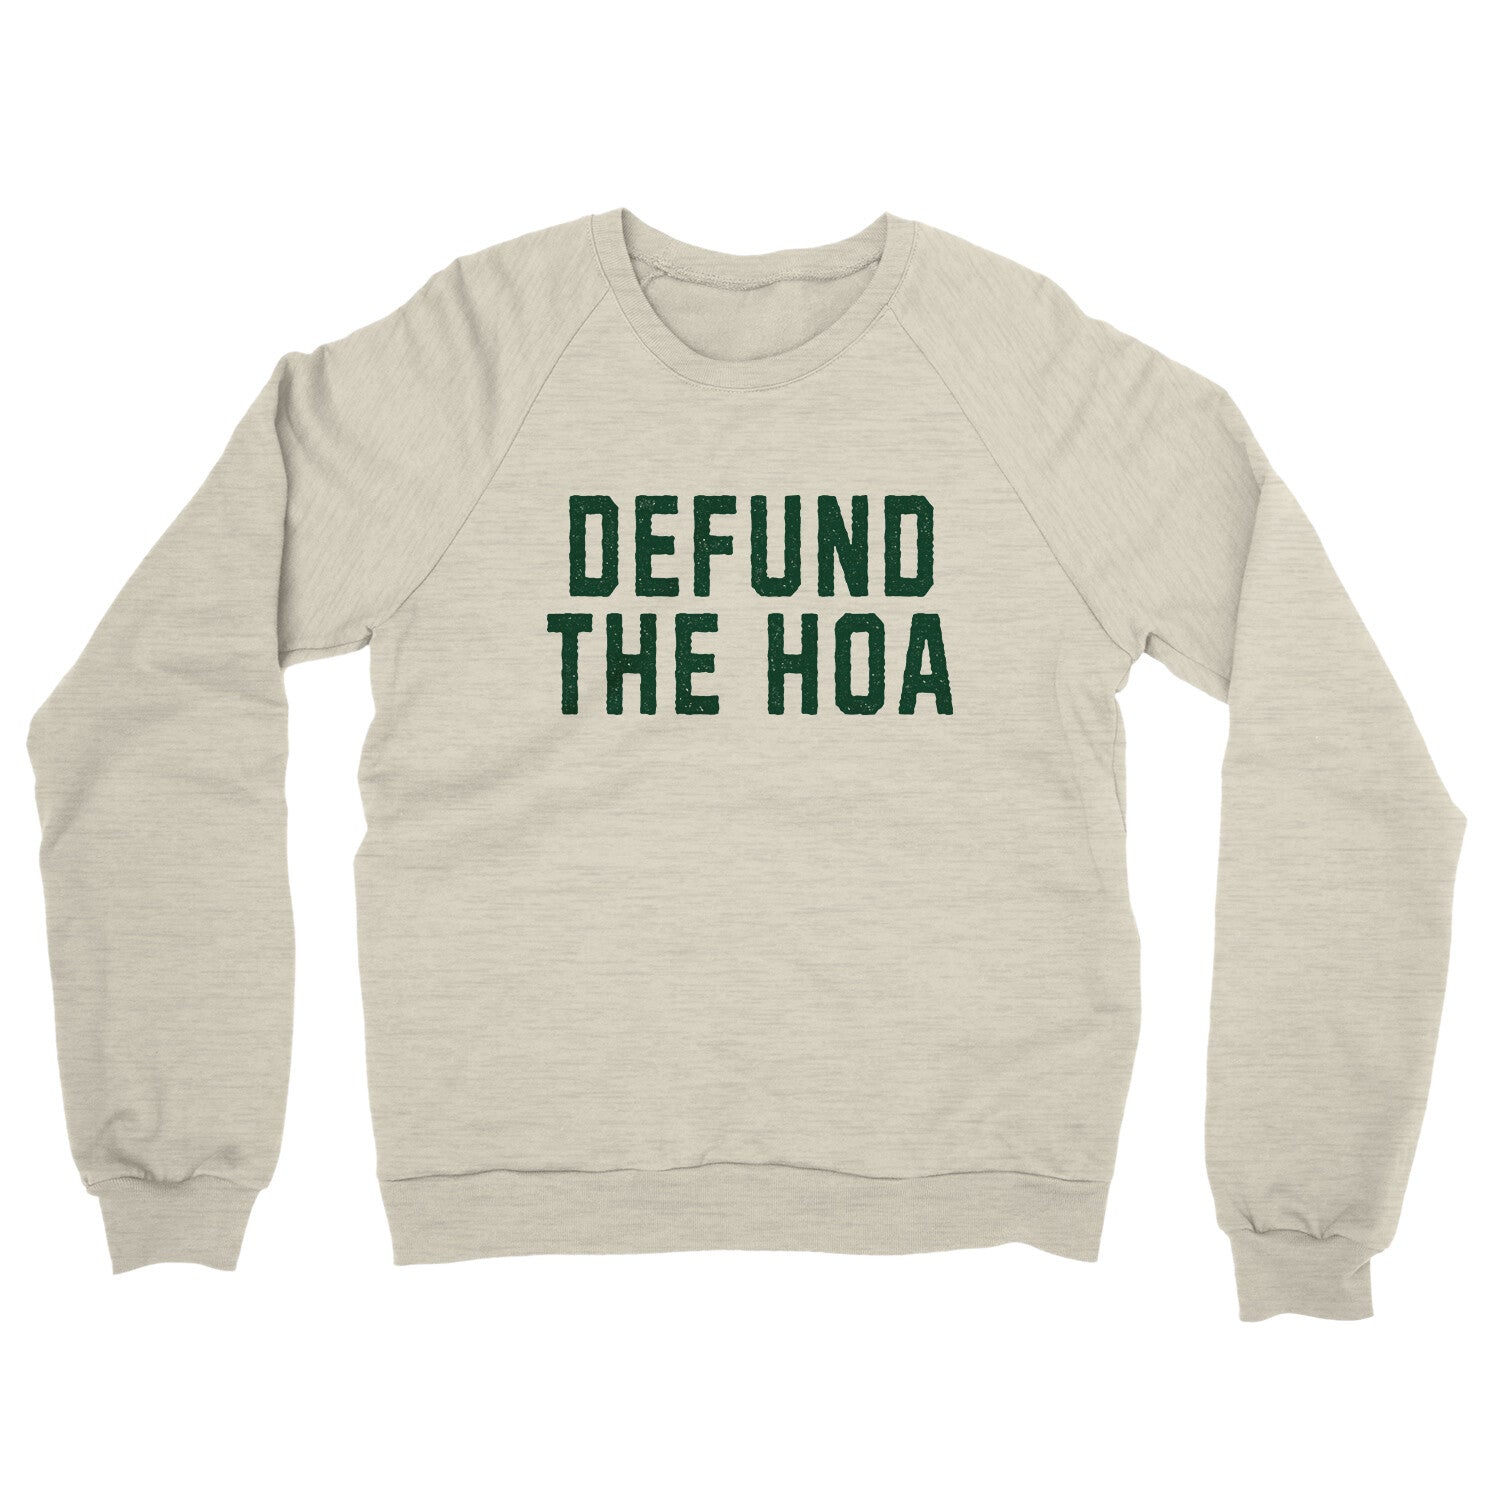 Defund the HOA in Heather Oatmeal Color